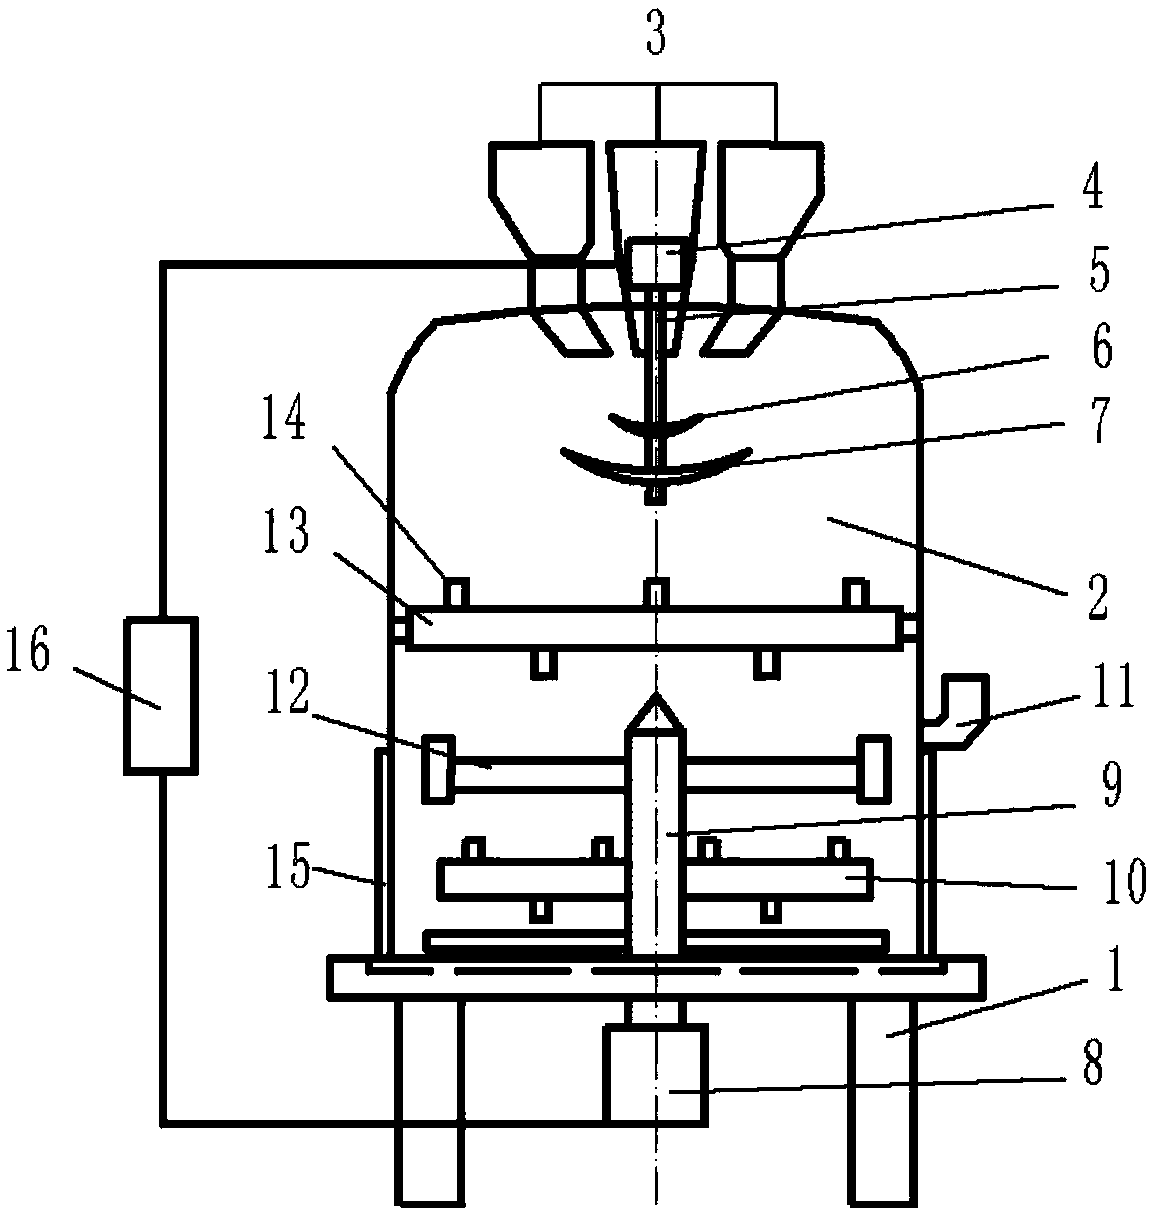 A sand mixer with enhanced primary mixing function